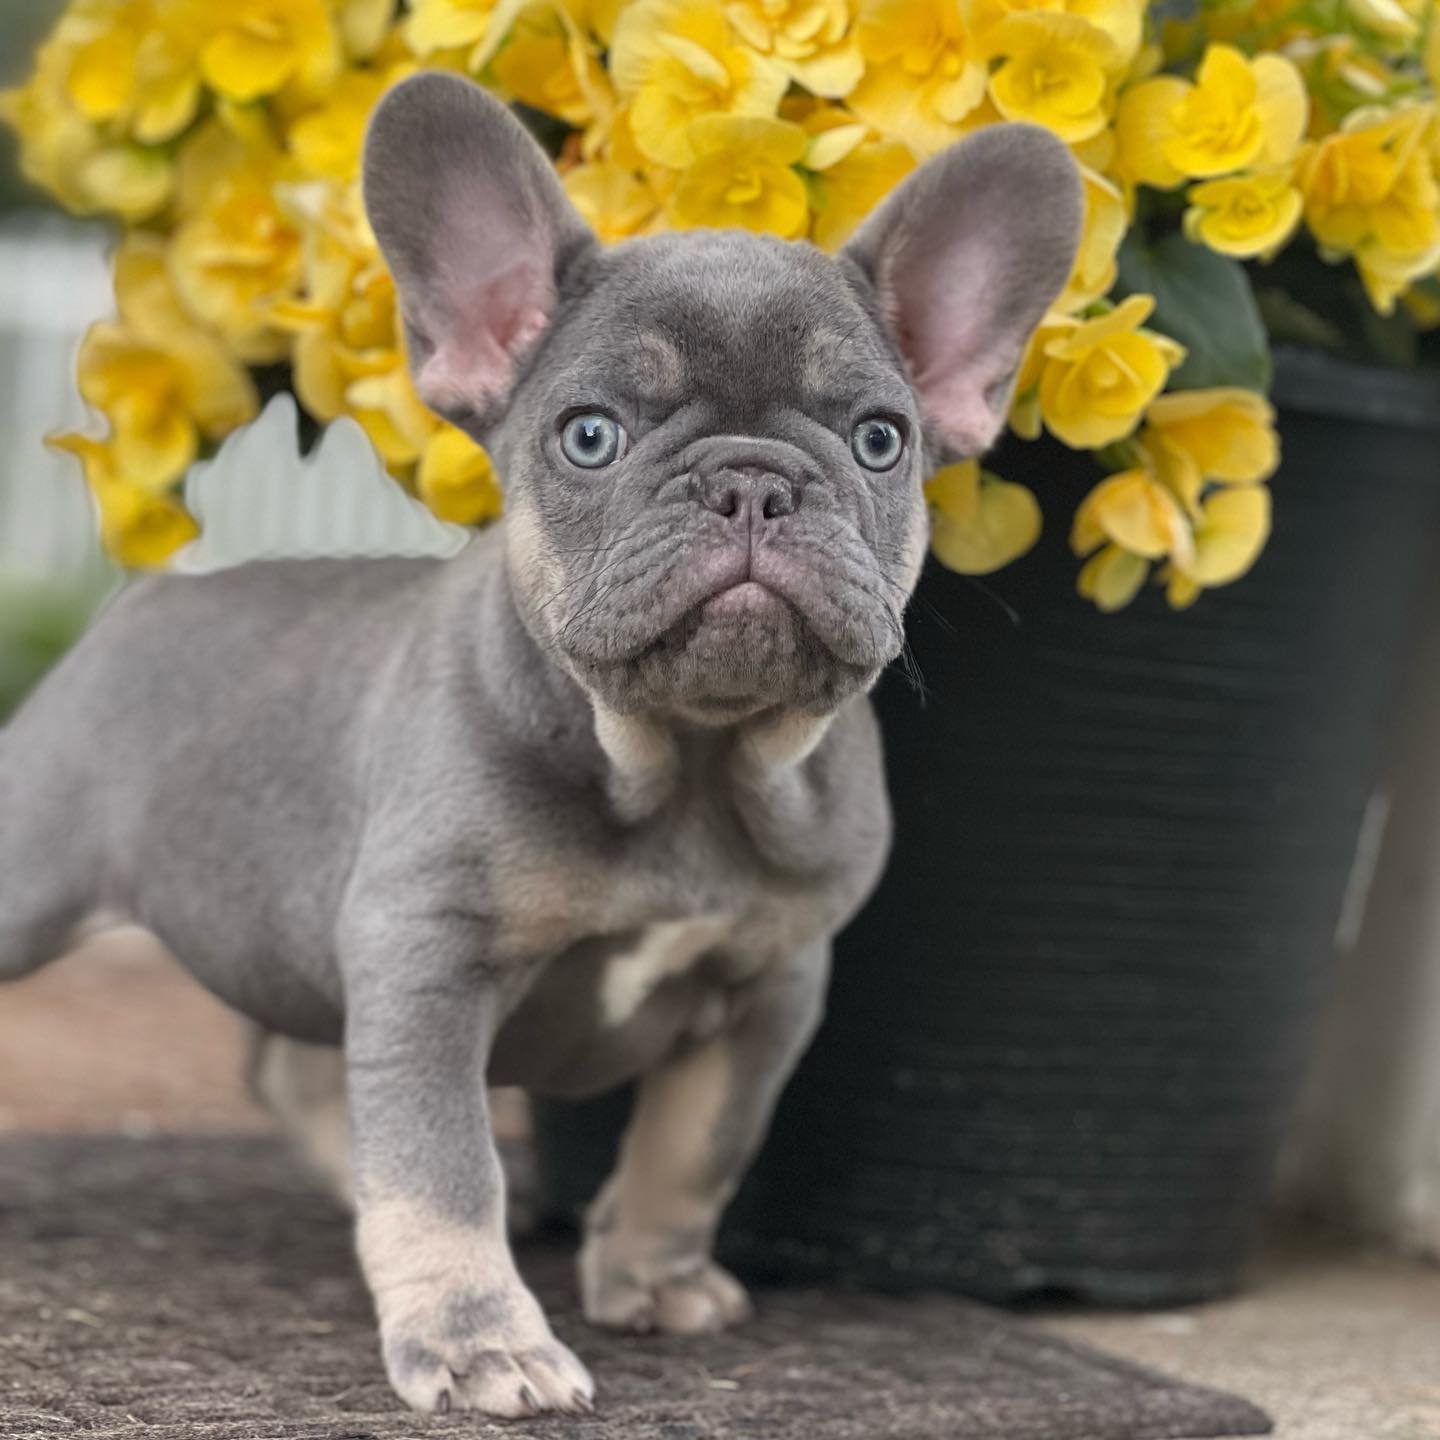 Garth!  There isn&rsquo;t a sweeter boy around.  He&rsquo;s so fun to play puppy games with and then he wants to snuggle up.  #highlyrecommended #frenchiepuppylove #frenchiepuppyforsale #frenchbulldogpuppy #frenchbulldogpuppyforsale